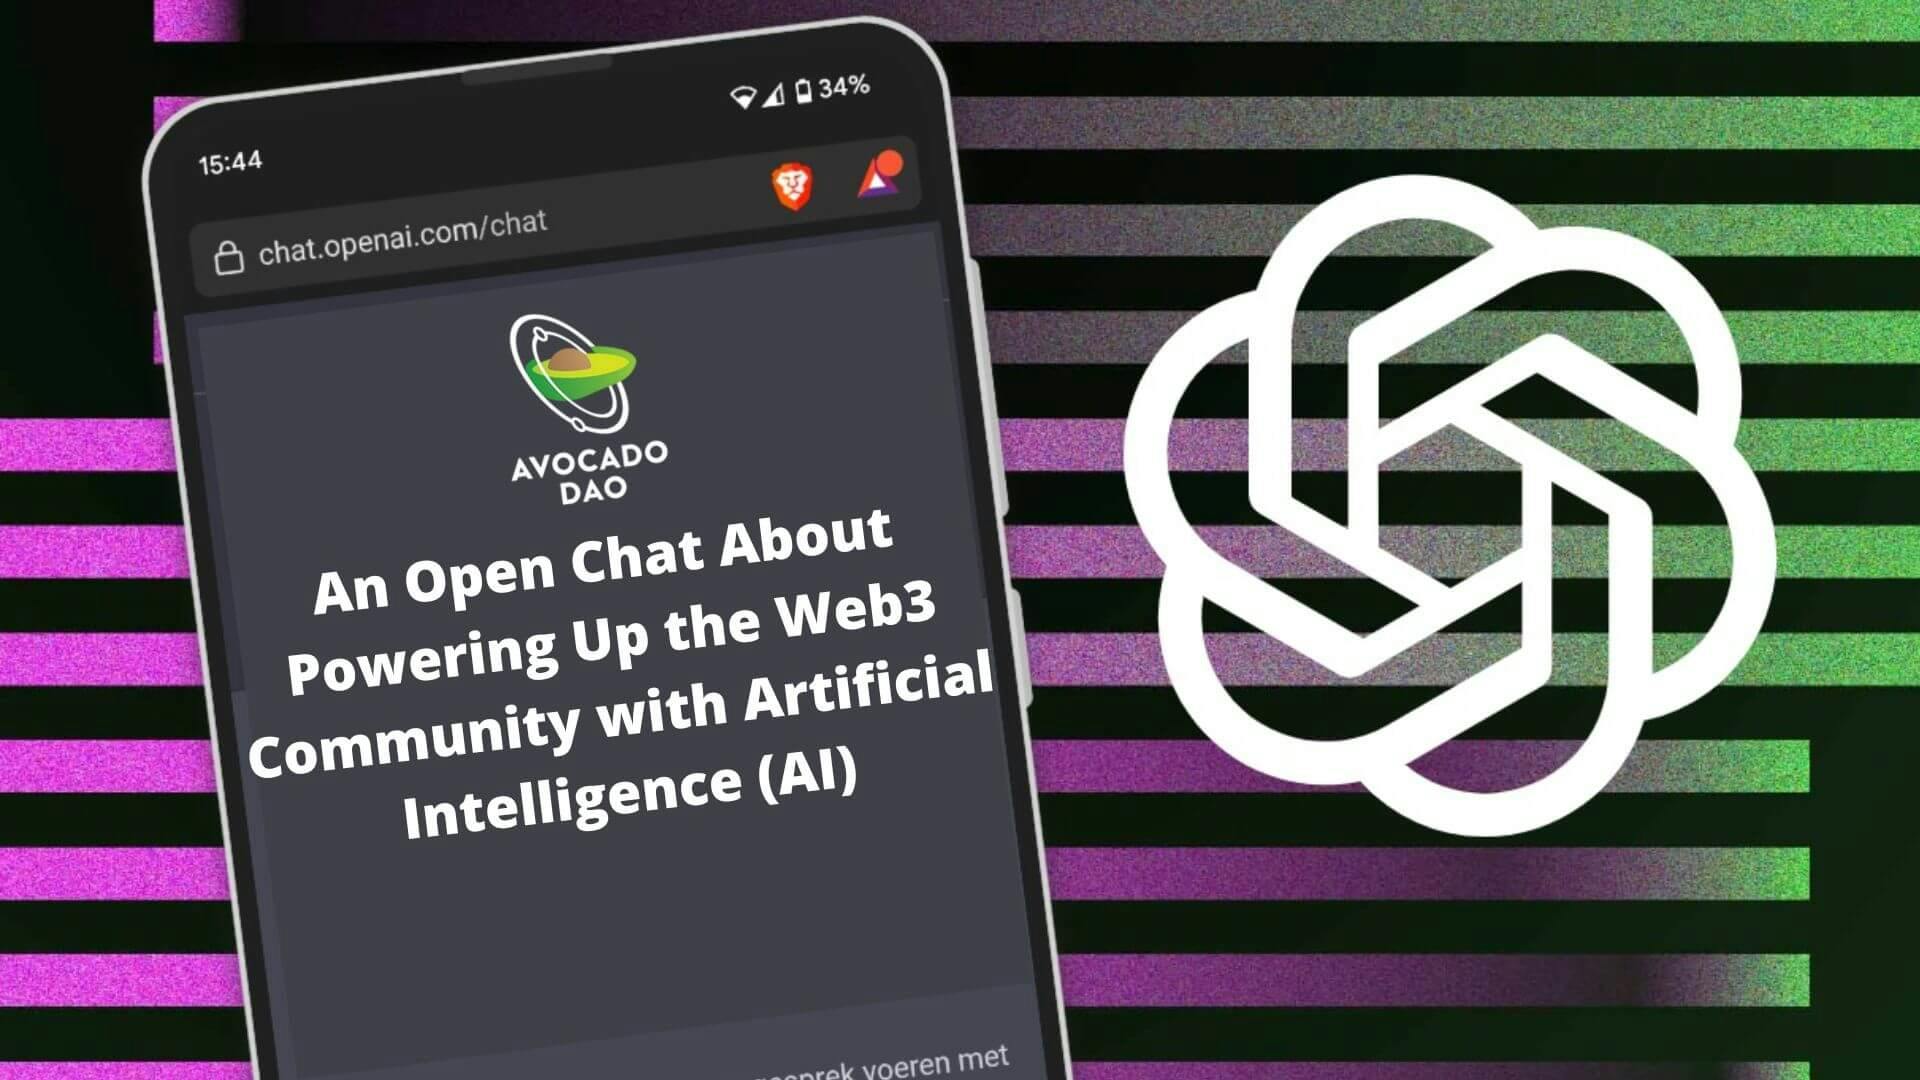 An open chat about powering up the Web3 community with Artificial Intelligence (AI)